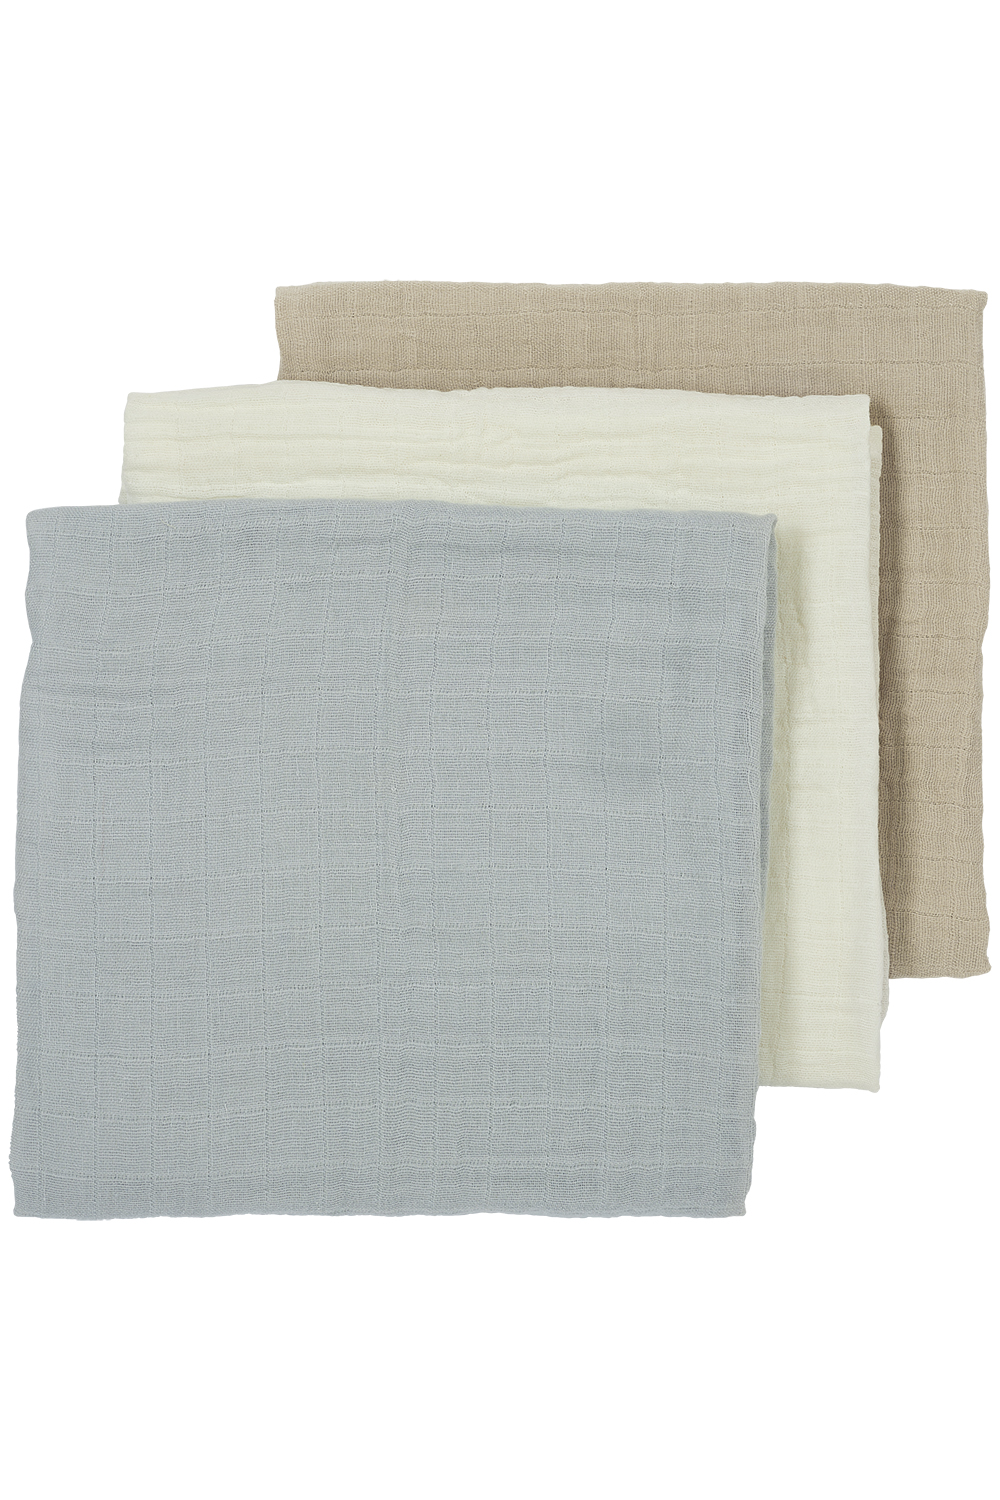 Pre-washed Musselin Mullwindeln 3er pack Uni - offwhite/light grey/sand - 70x70cm